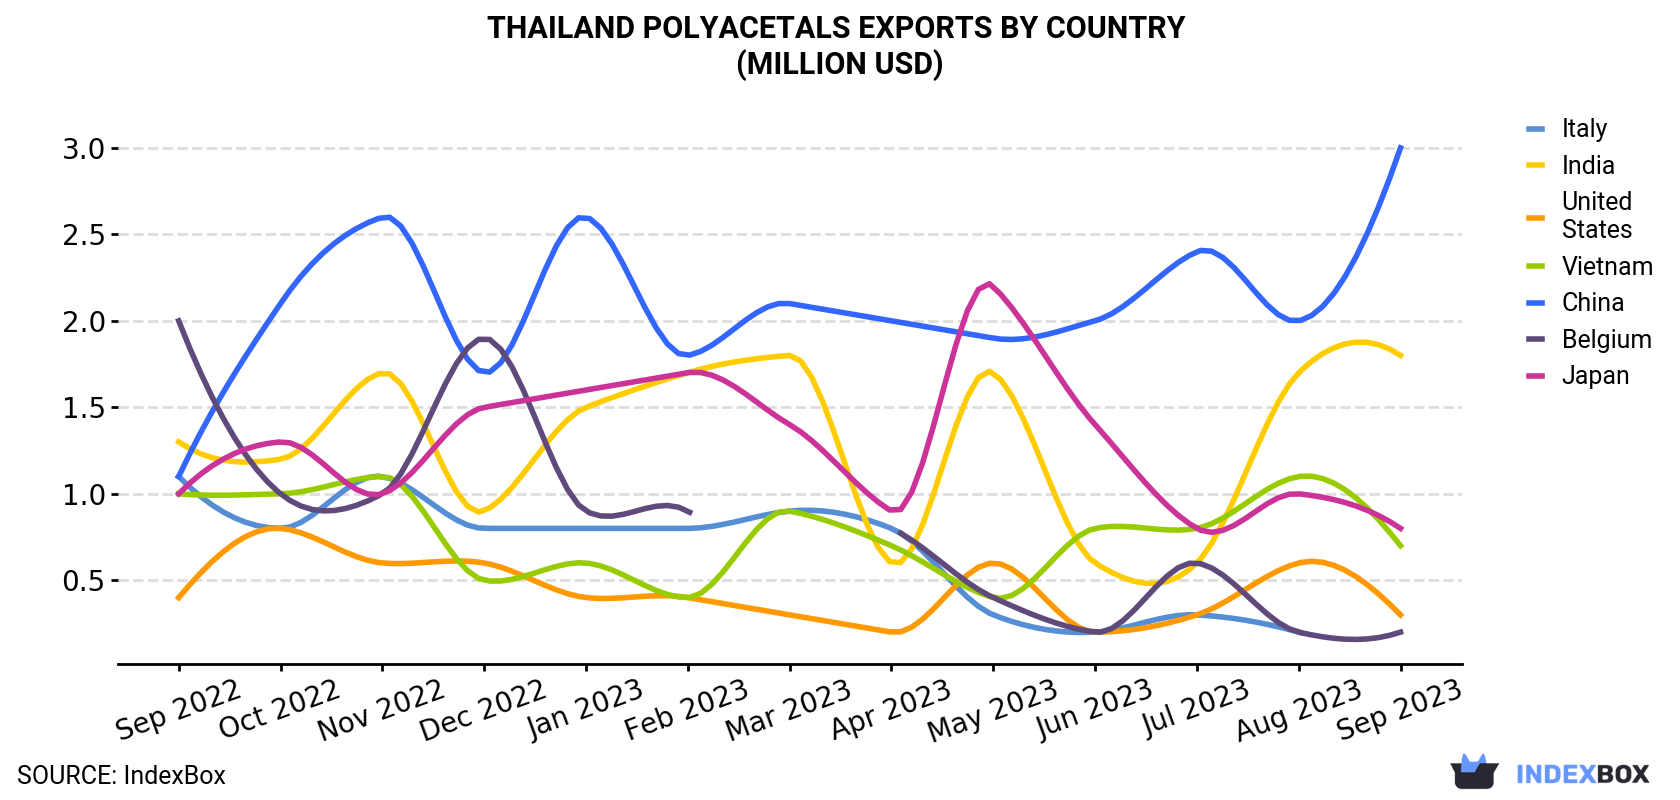 Thailand Polyacetals Exports By Country (Million USD)